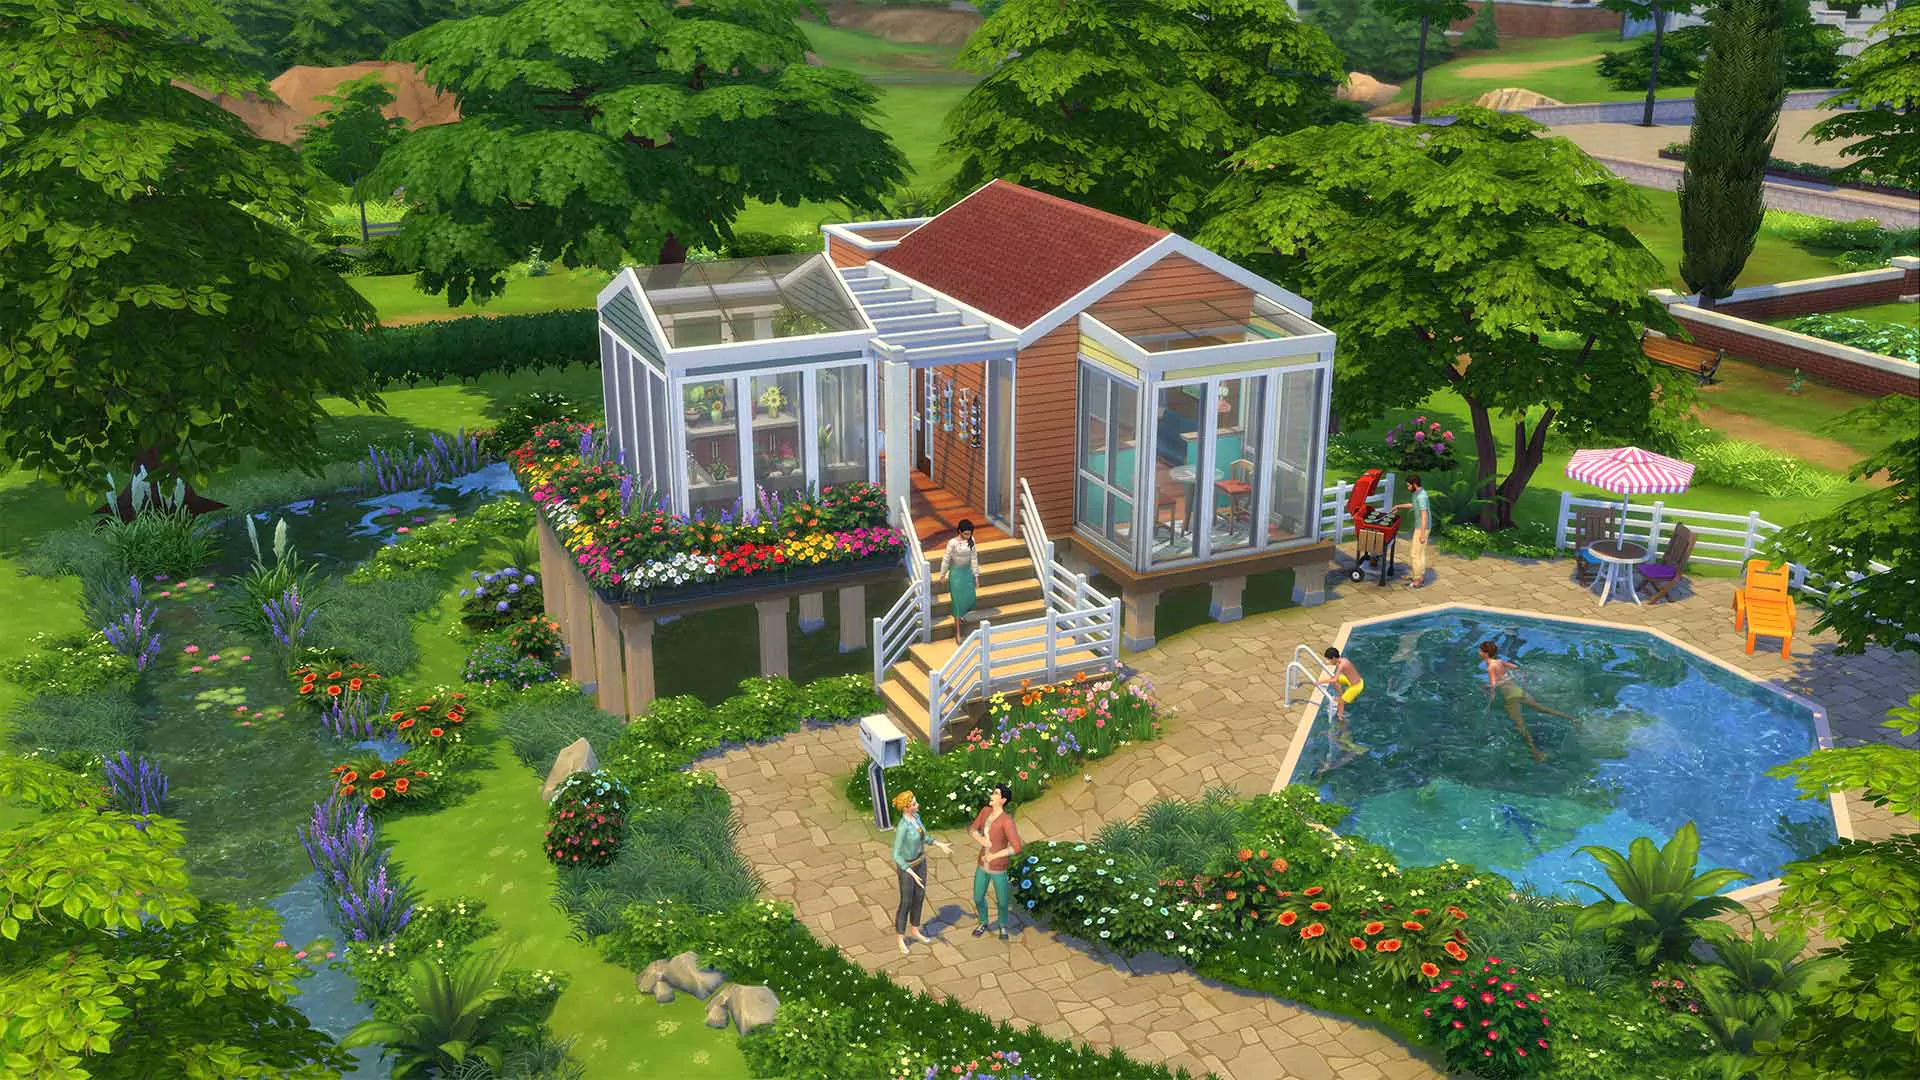 The Sims 4 Tiny Living 1.60.54.1020 Update Only G4TW - The Sim Architect